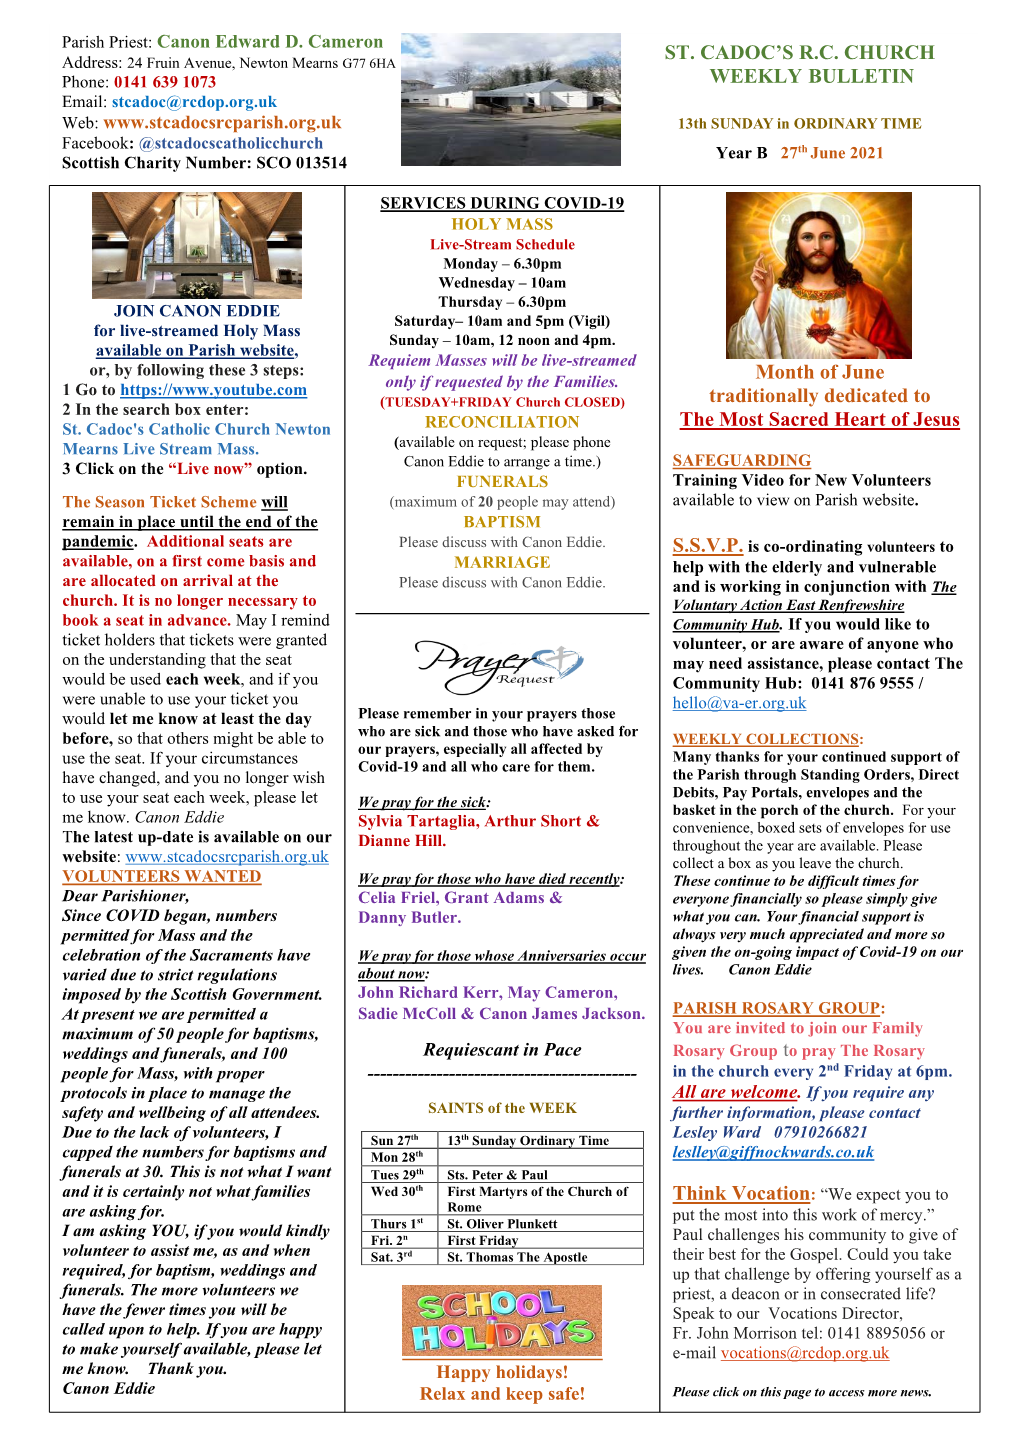 ST. CADOC's R.C. CHURCH WEEKLY BULLETIN Month of June